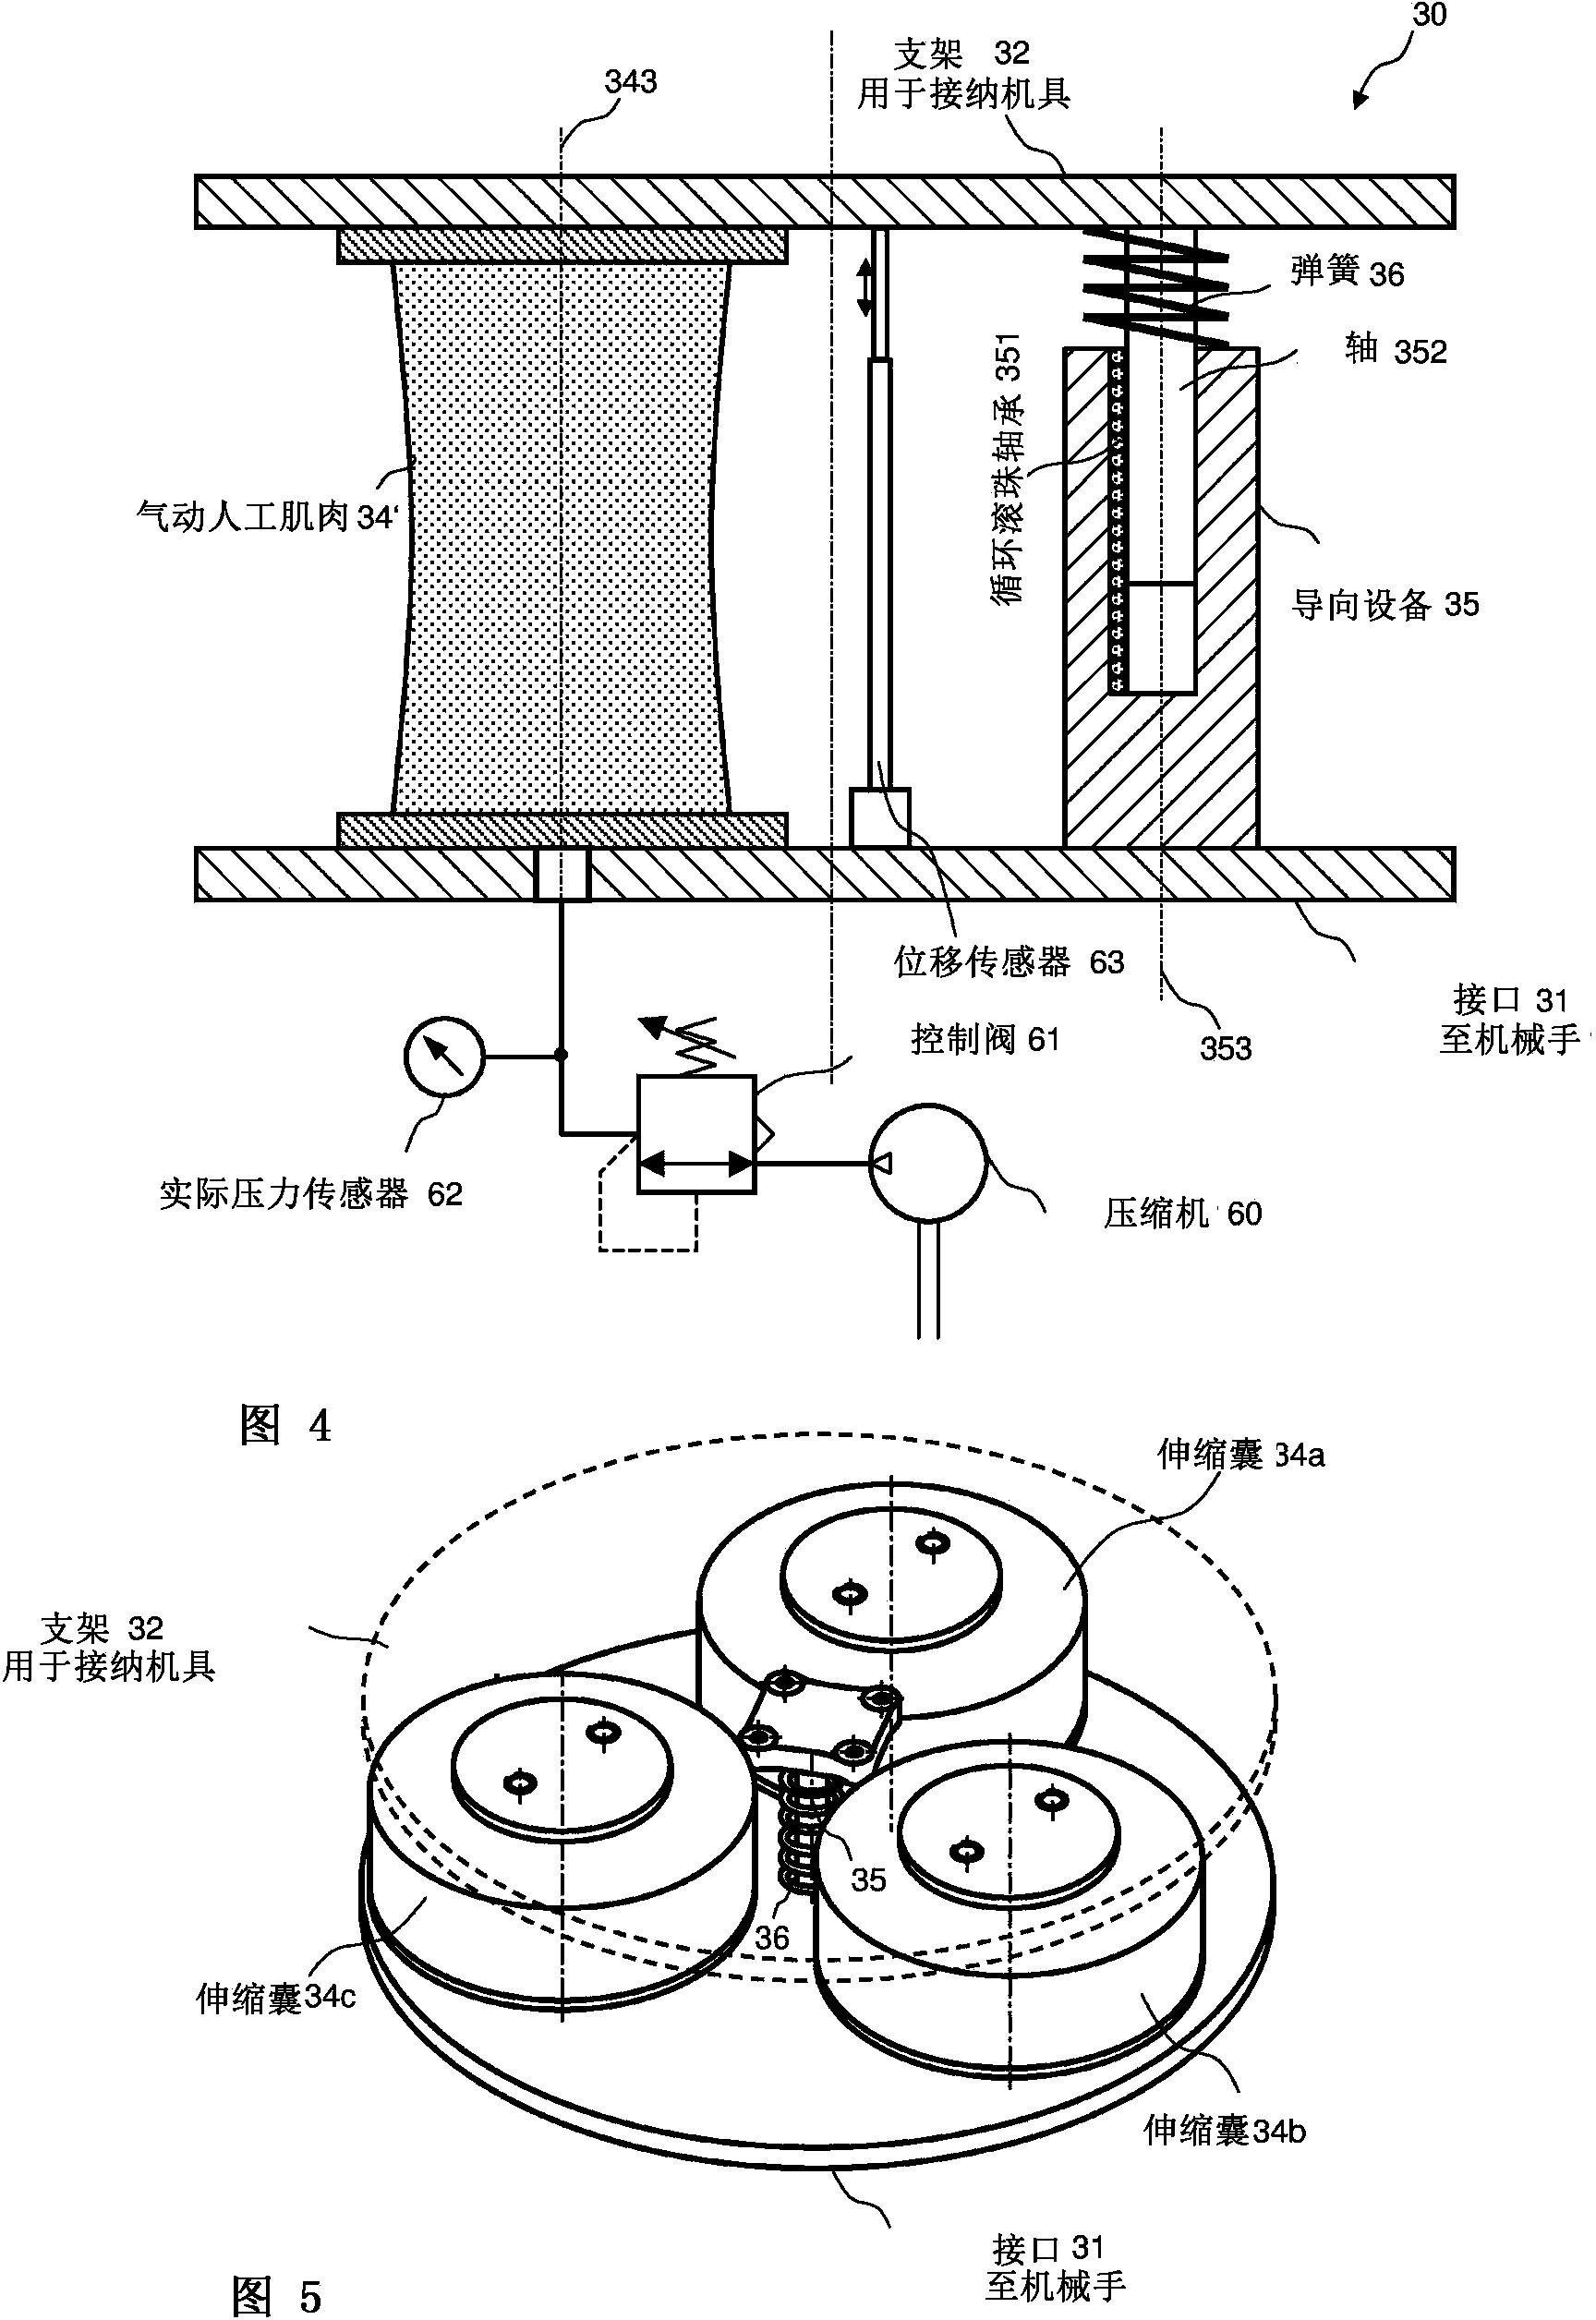 Active handling apparatus and method for contact tasks